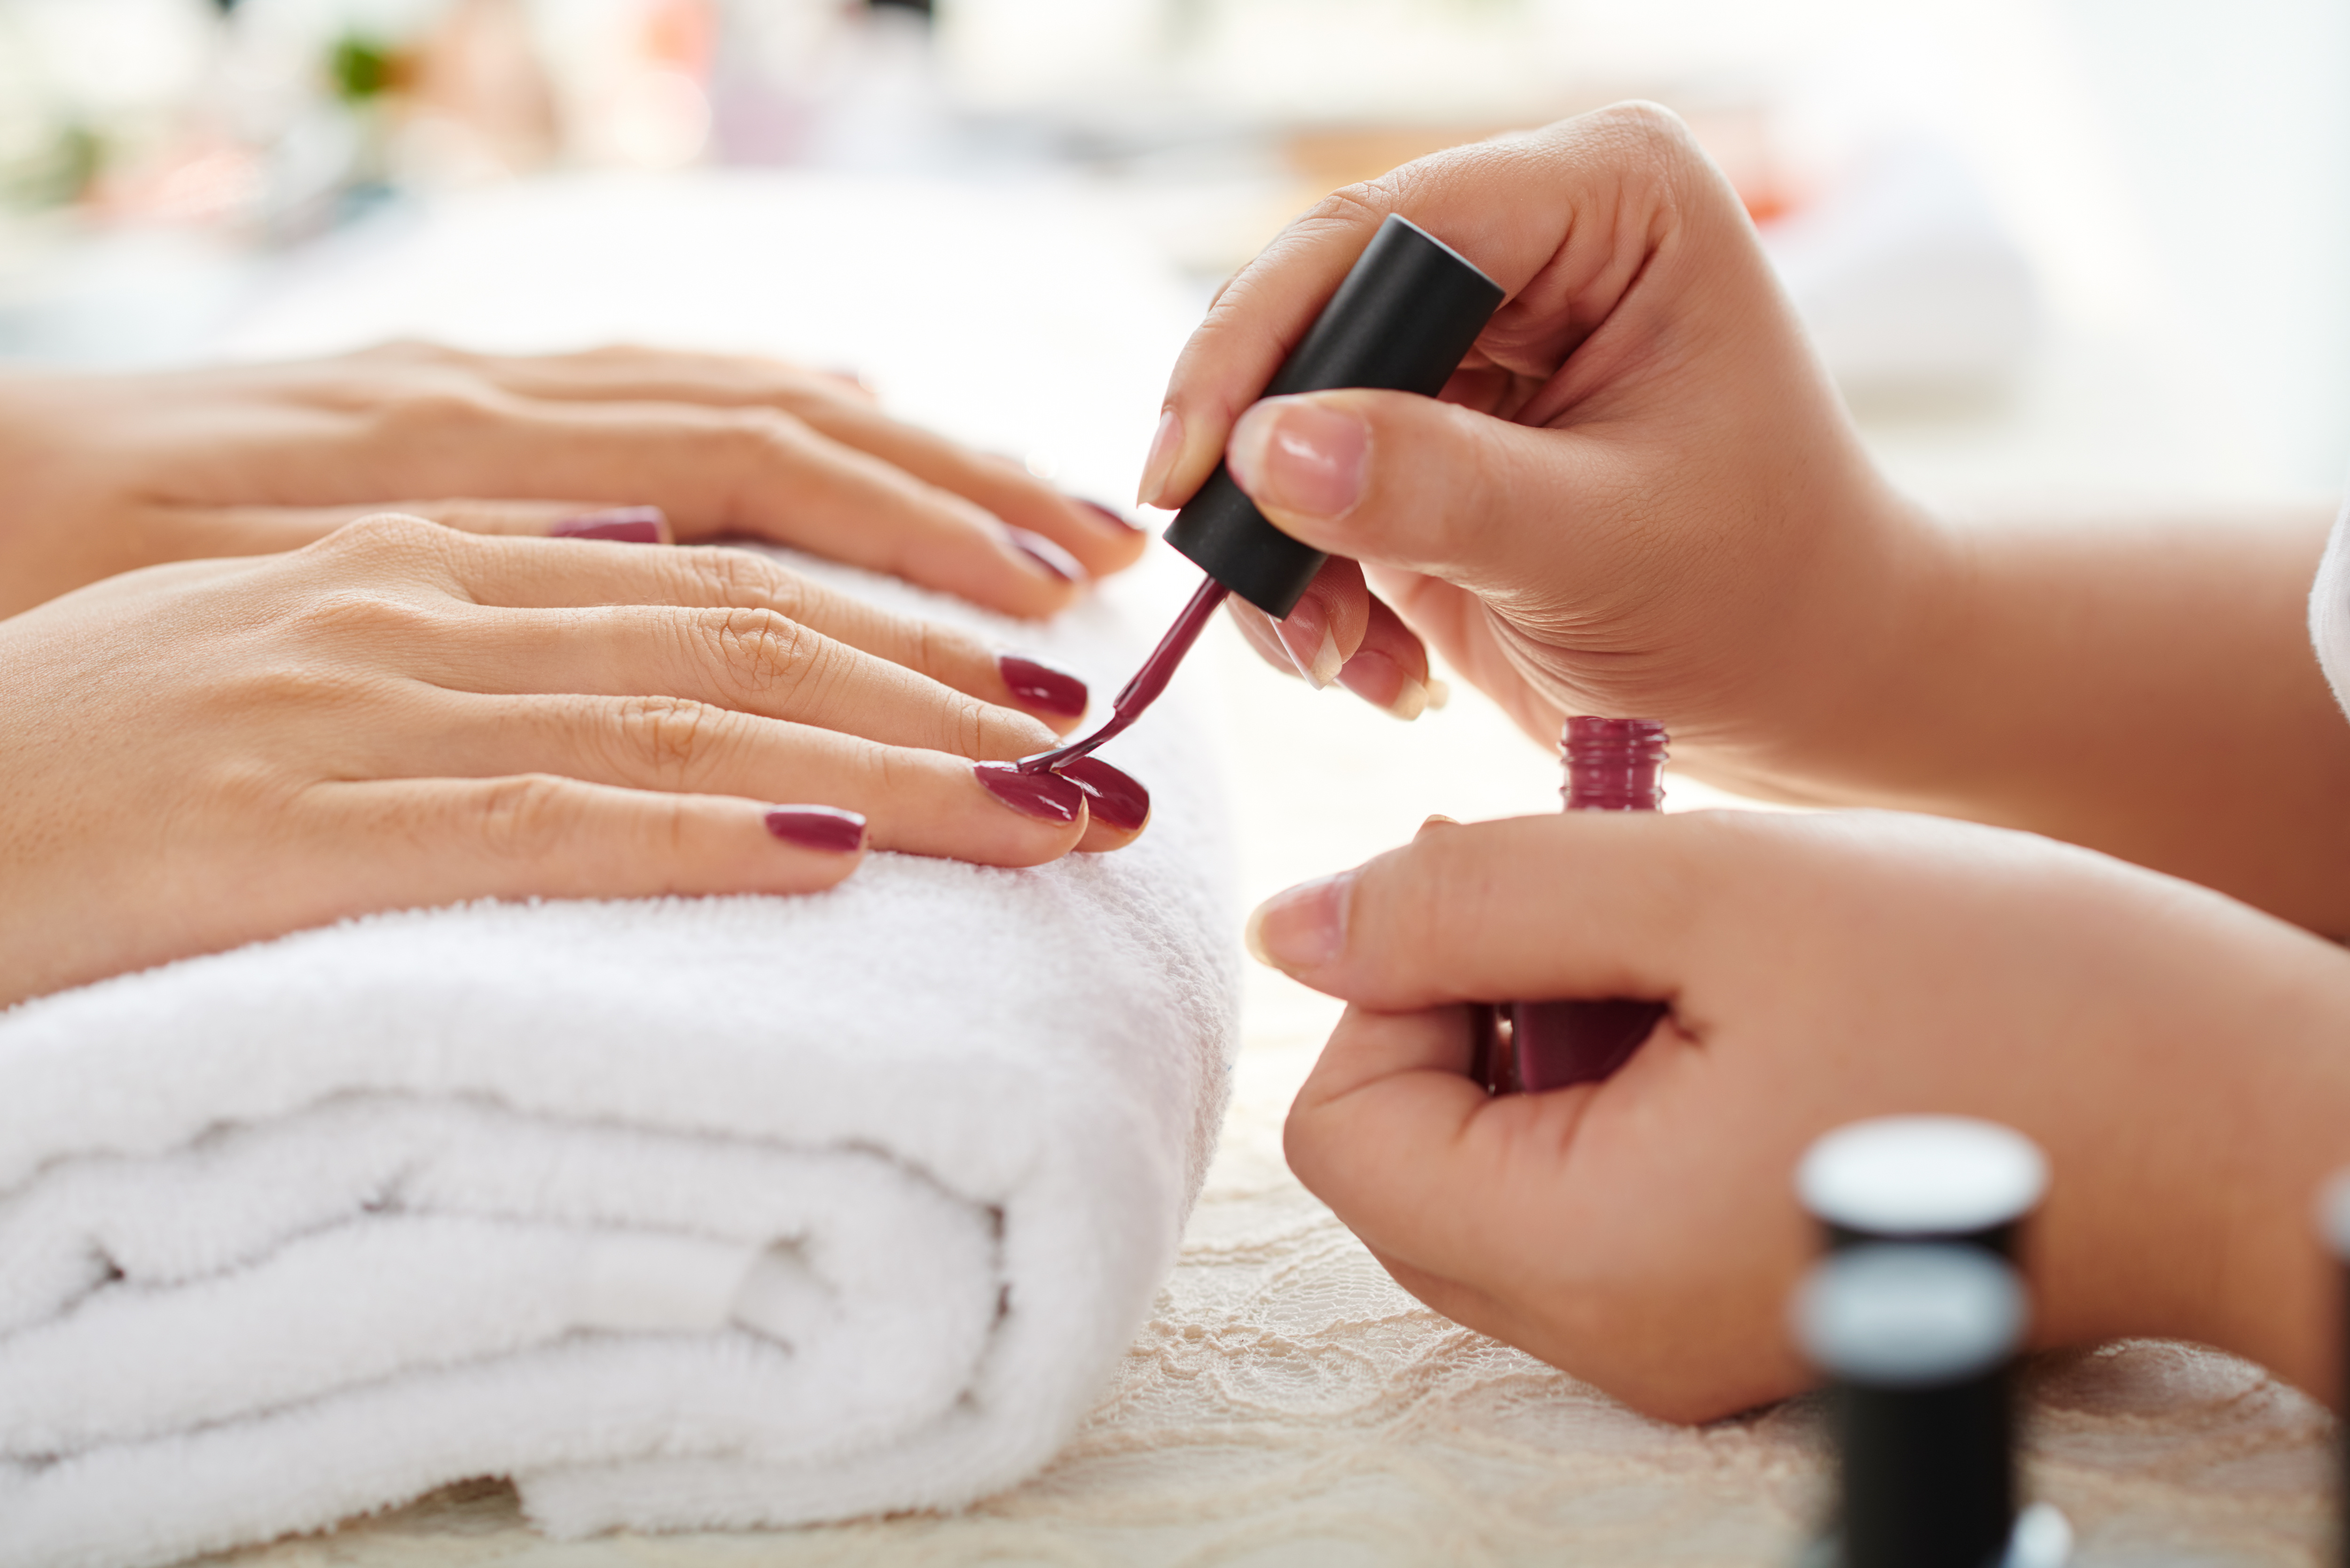 Gel Manicure + Return Soak-Off + Classic / Gel Pedicure for 1 Person (2 Sessions) at Pixie Nail Spa - Get Deals, Cashback and Rewards with ShopBack GO